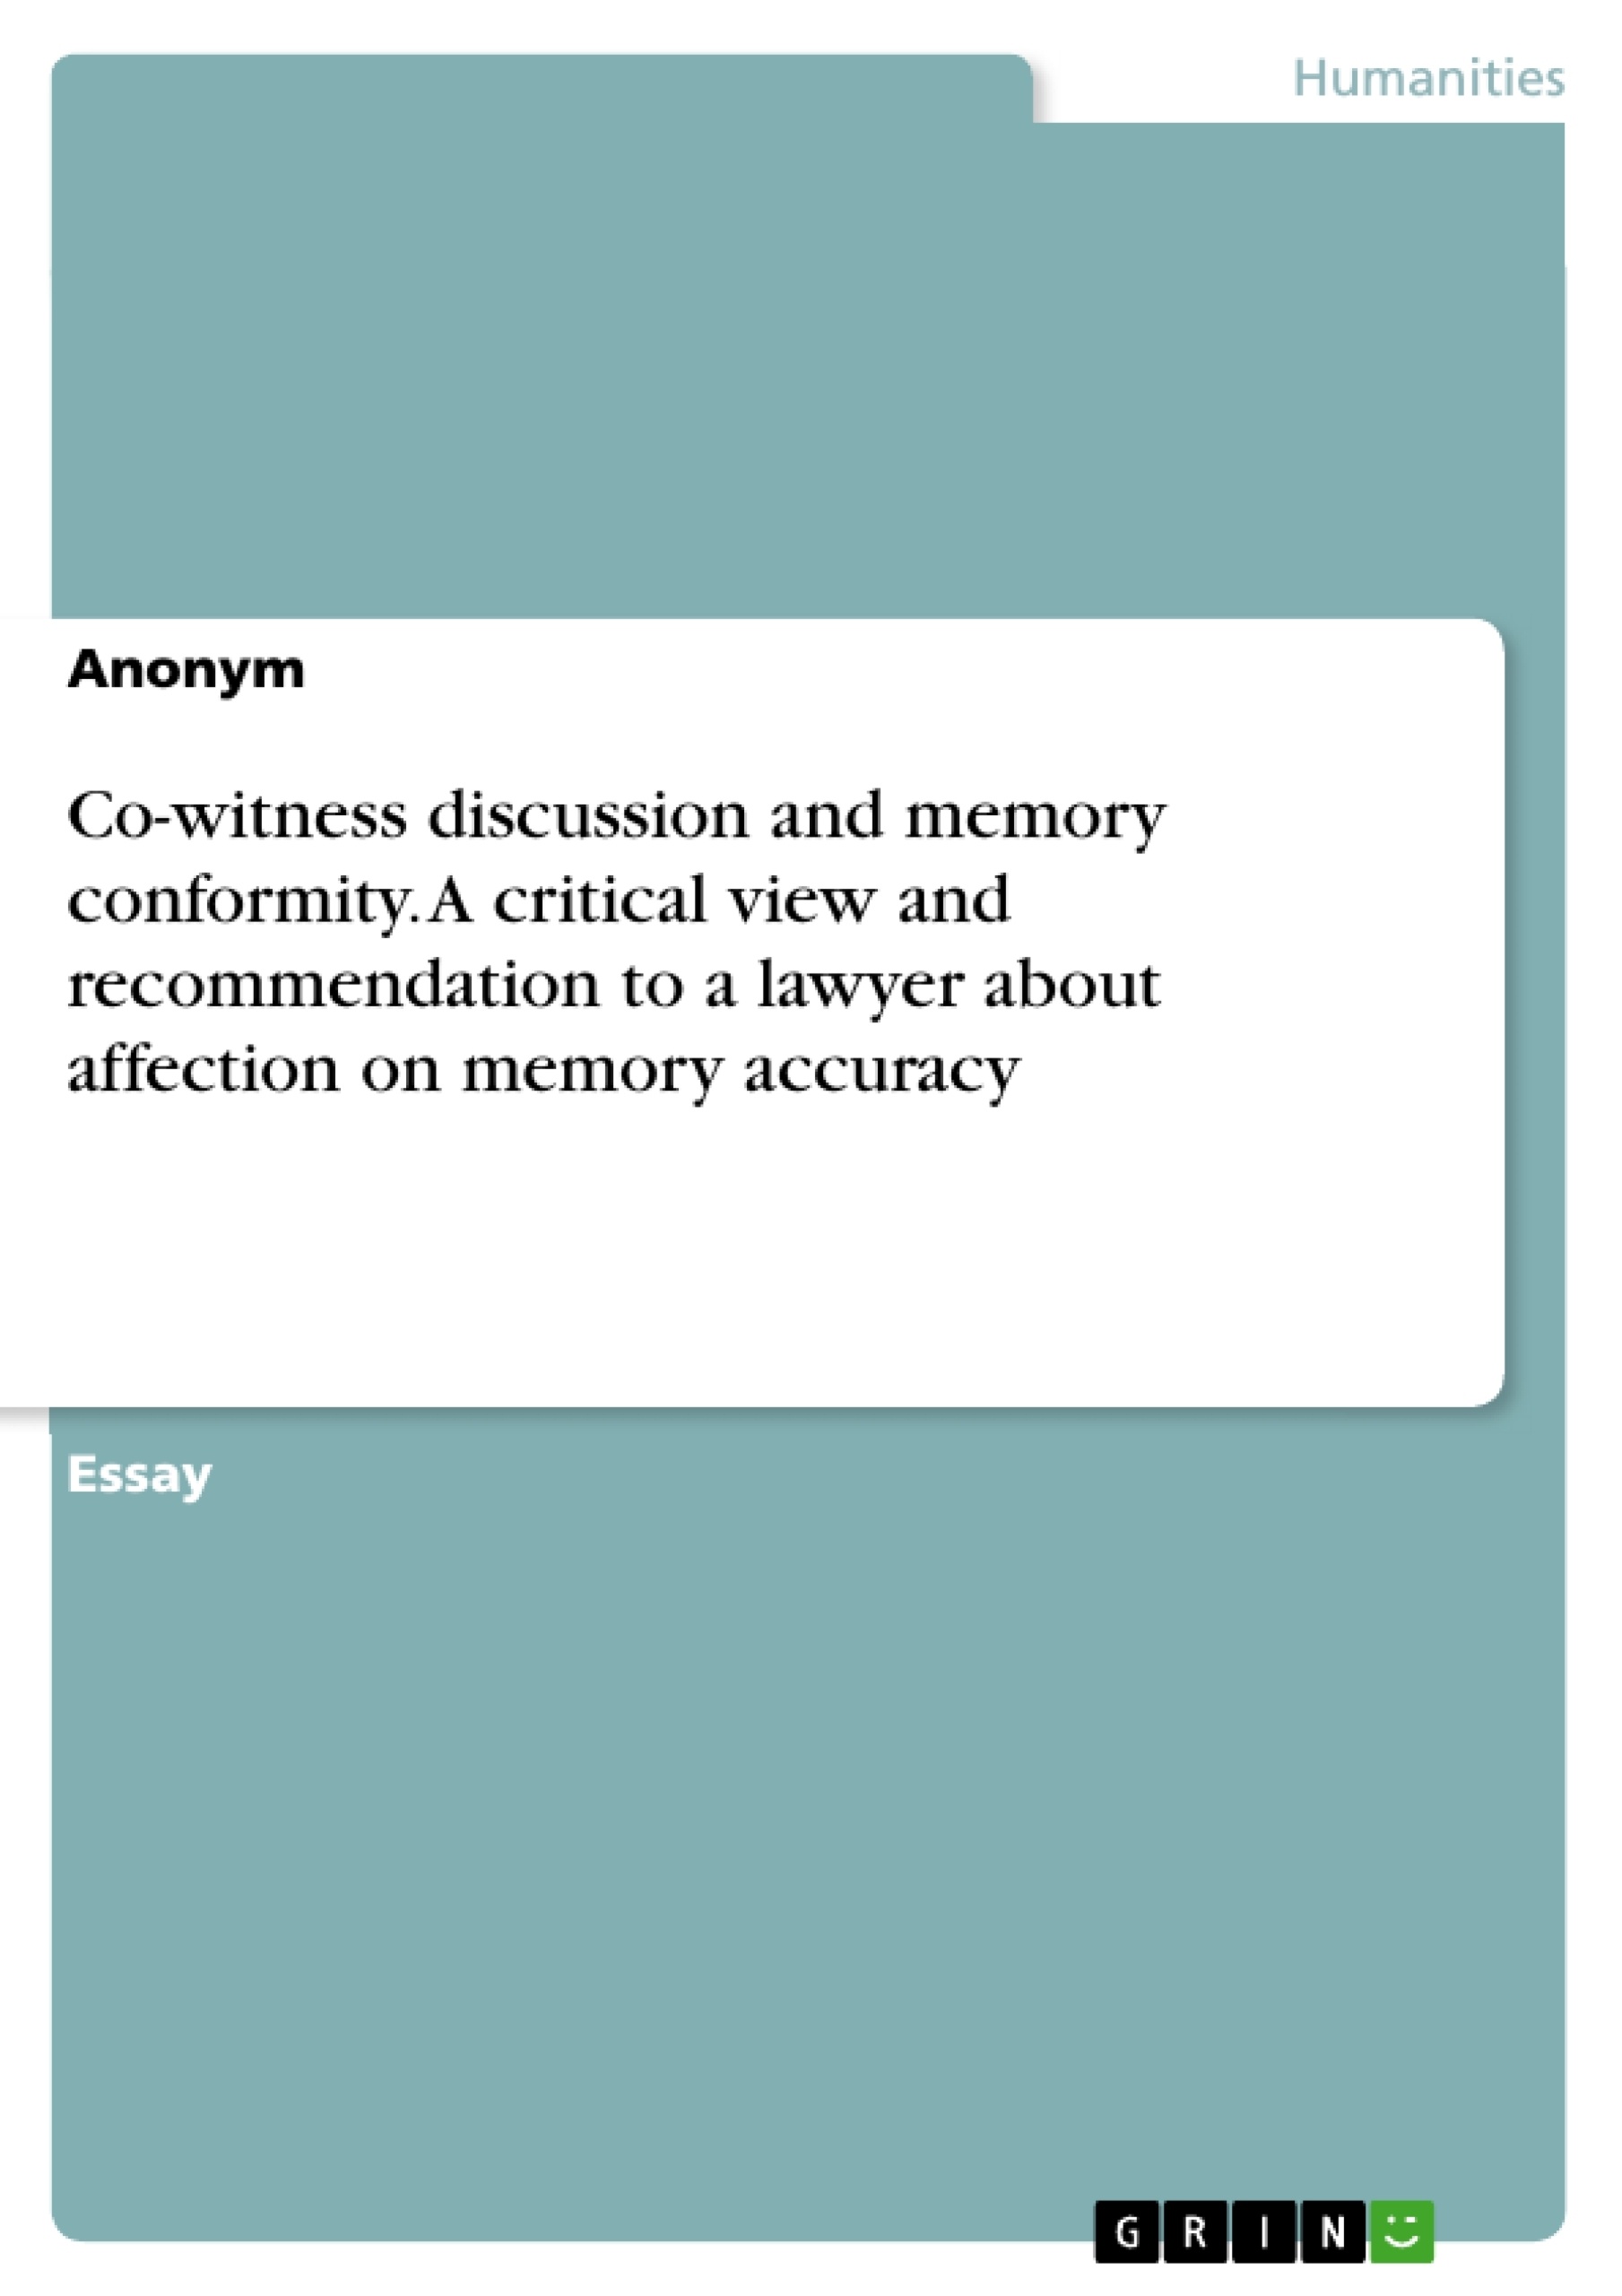 Título: Co-witness discussion and memory conformity. A critical view and recommendation to a lawyer about affection on memory accuracy